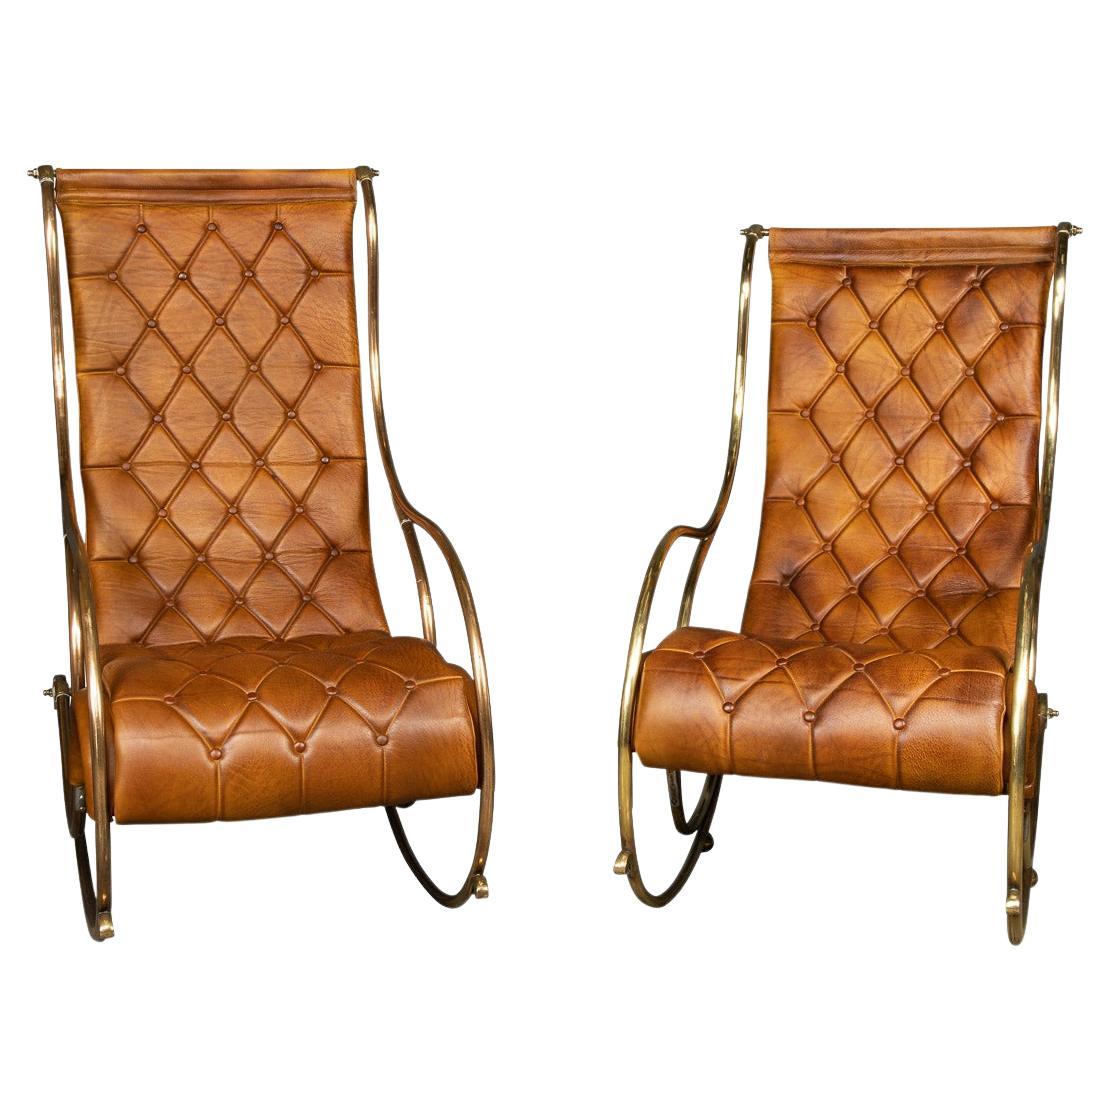 20th Century British Made Pair of Leather Rocking Chairs, c.1950 For Sale